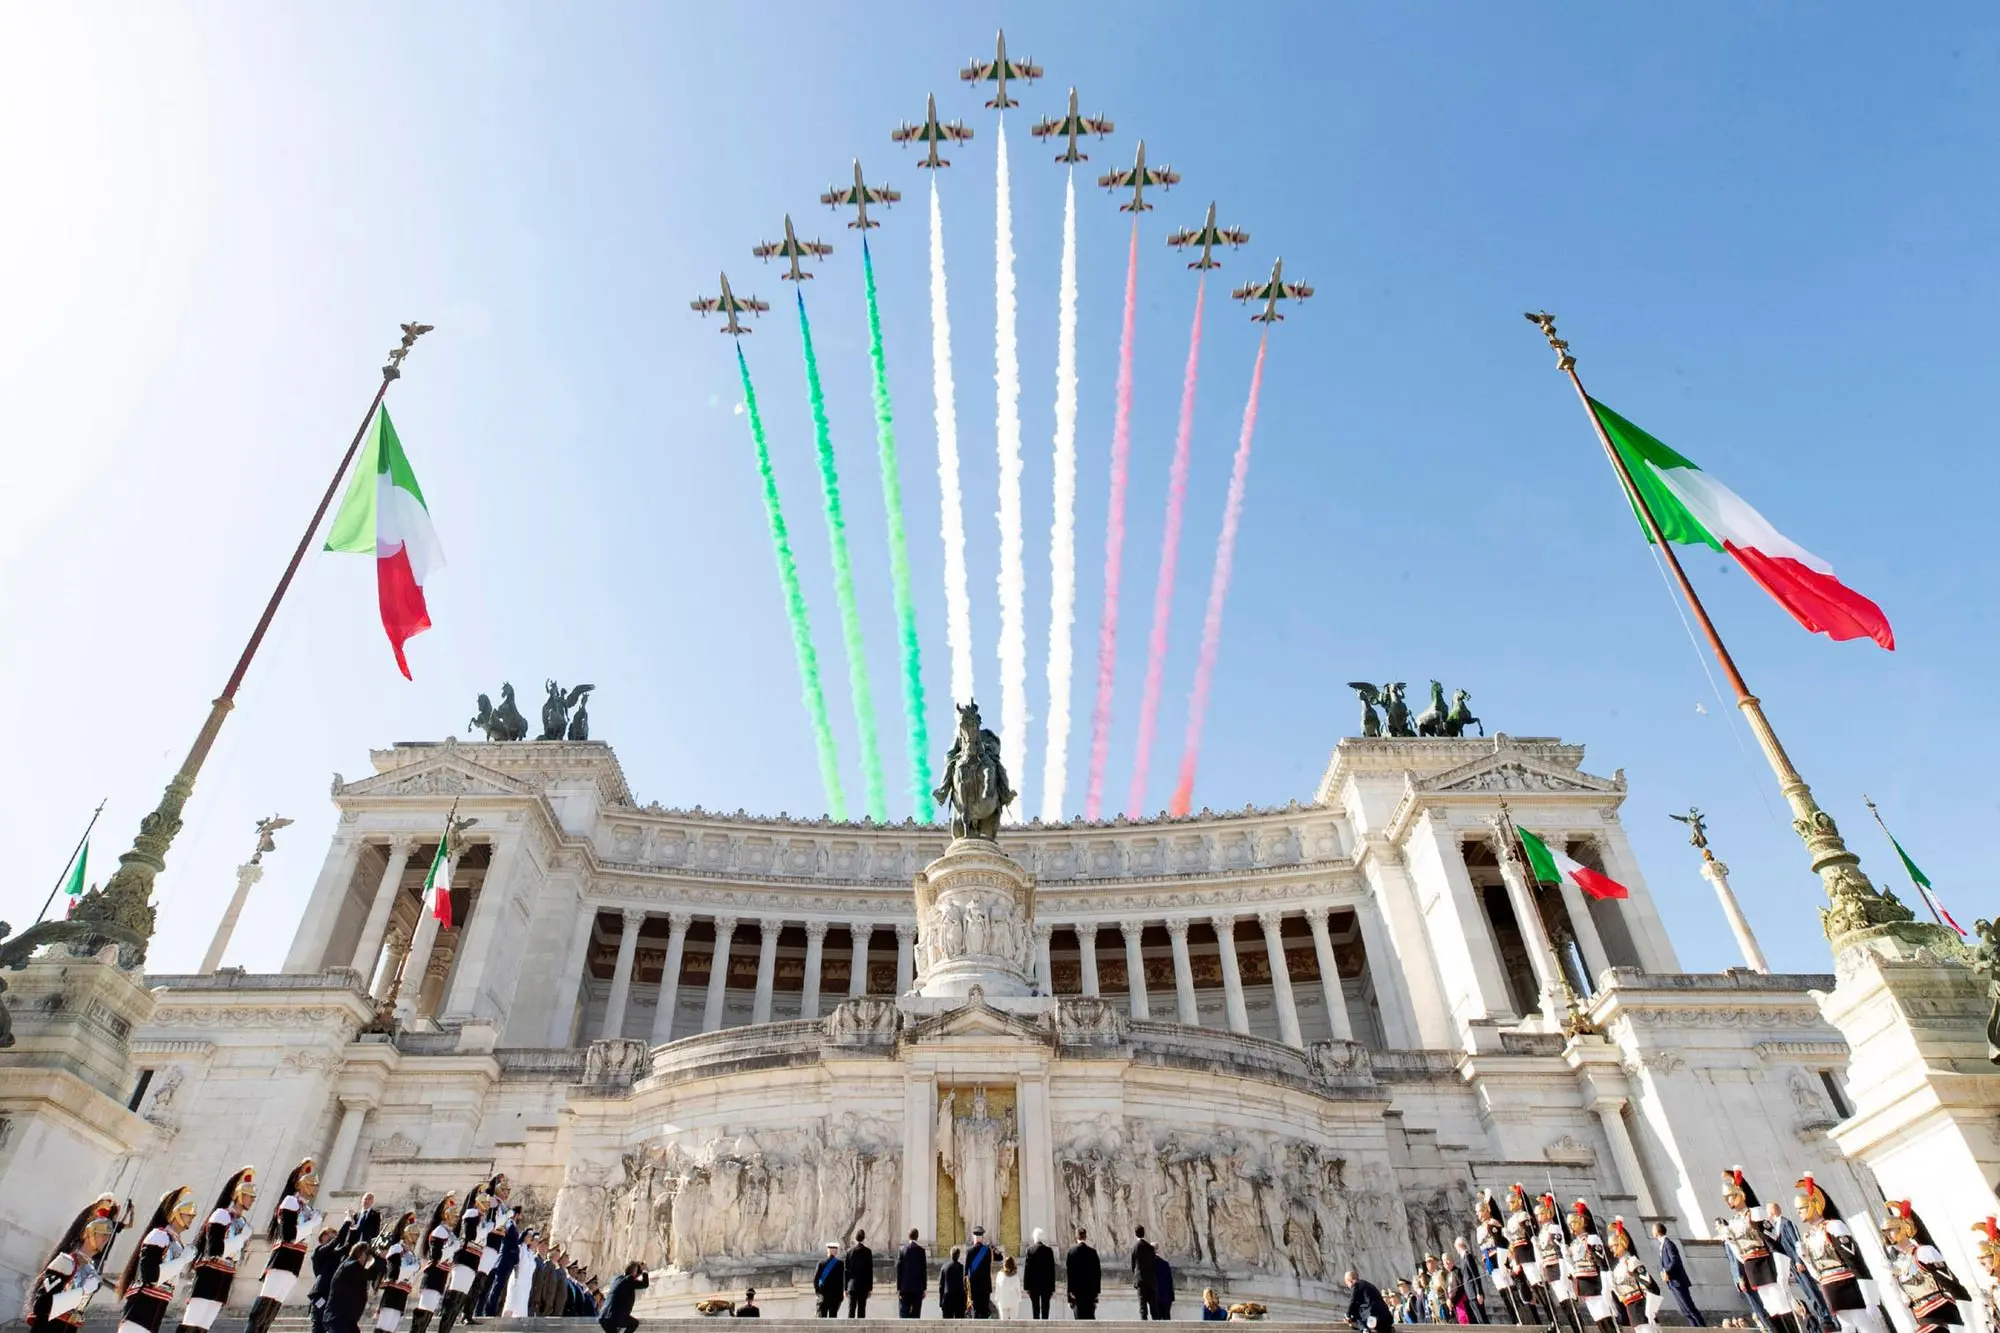 Italian Air Forces aerobatic demonstration team, the Frecce Tricolori, fly during the Republic Day celebrations in Rome, Italy, 02 June 2022. The anniversary marks the founding of the Italian Republic in 1946. ANSA/ QUIRINAL PRESS OFFICE/ PAOLO GIANDOTTI +++ ANSA PROVIDES ACCESS TO THIS HANDOUT PHOTO TO BE USED SOLELY TO ILLUSTRATE NEWS REPORTING OR COMMENTARY ON THE FACTS OR EVENTS DEPICTED IN THIS IMAGE; NO ARCHIVING; NO LICENSING +++